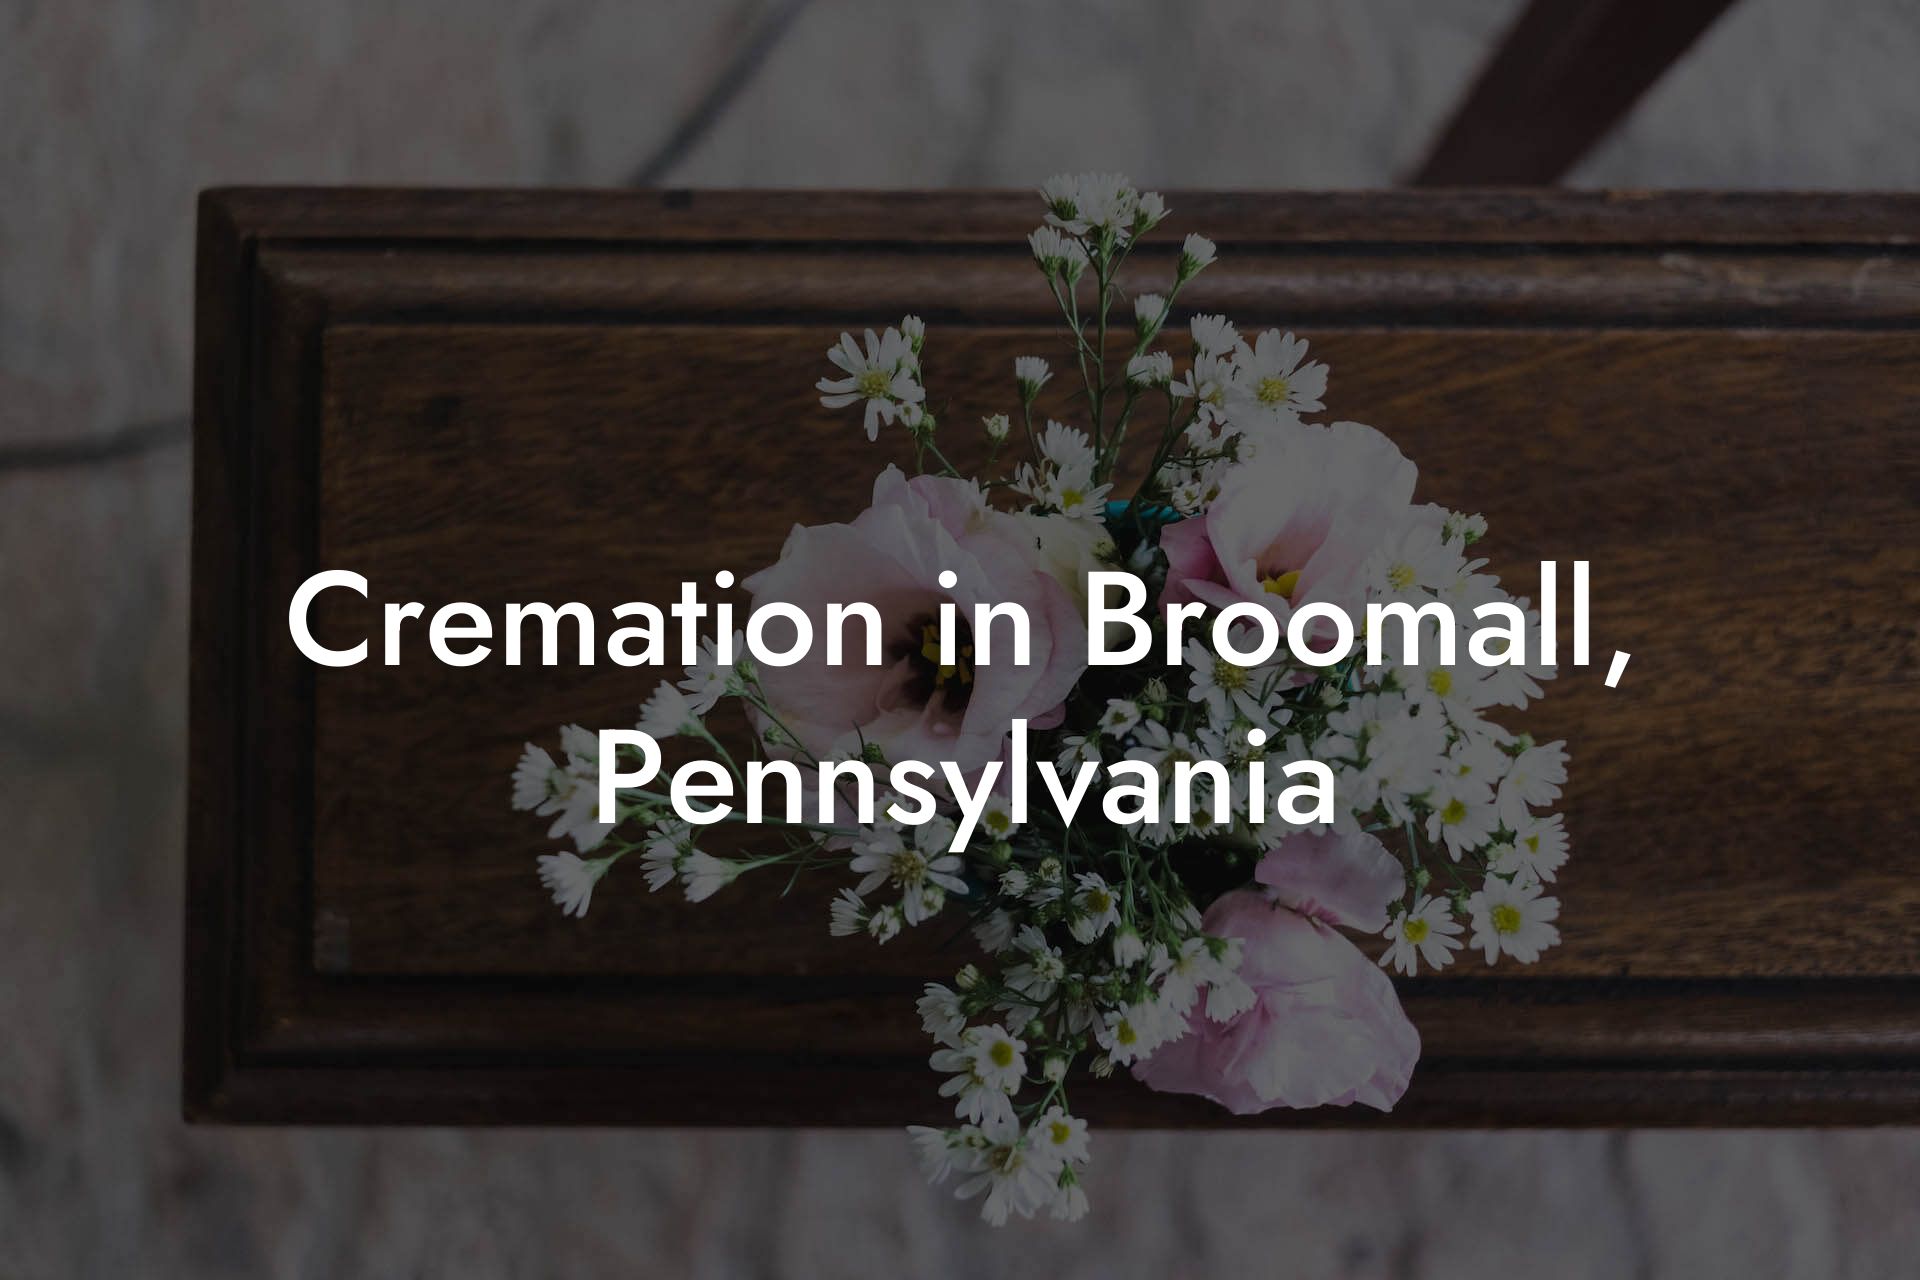 Cremation in Broomall, Pennsylvania